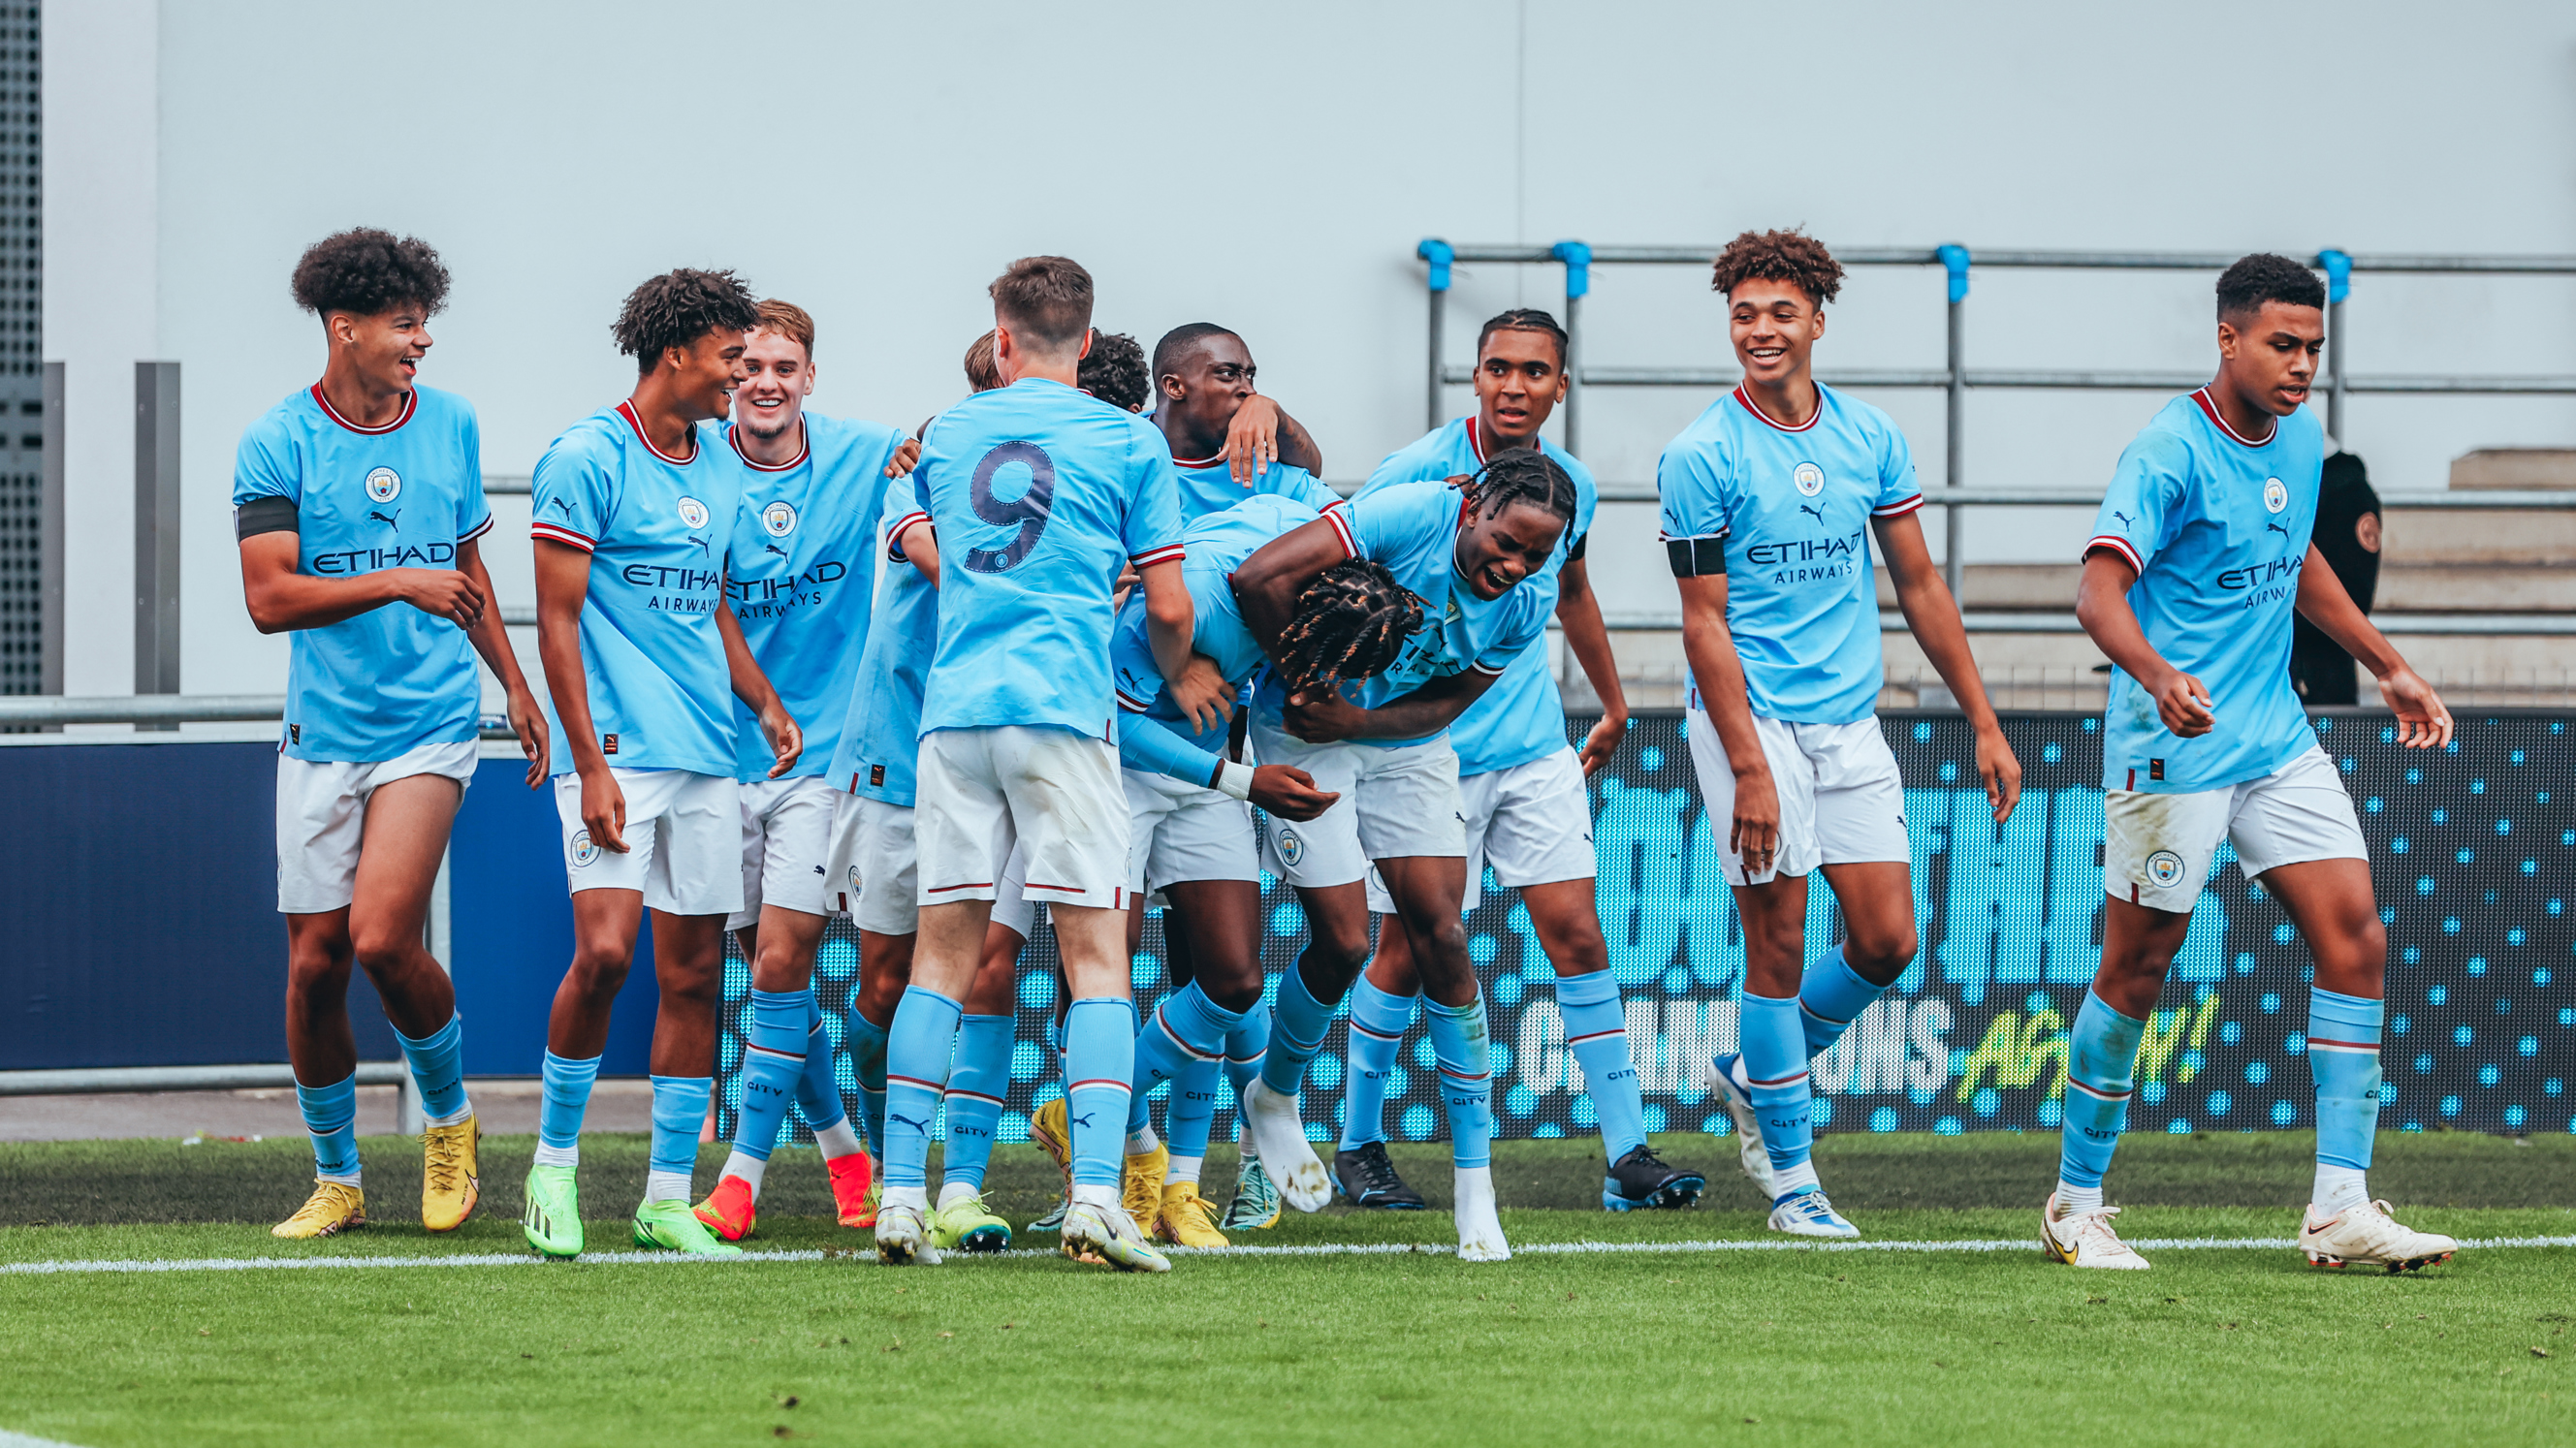 City suffer UEFA Youth League exit at hands of Hajduk Split